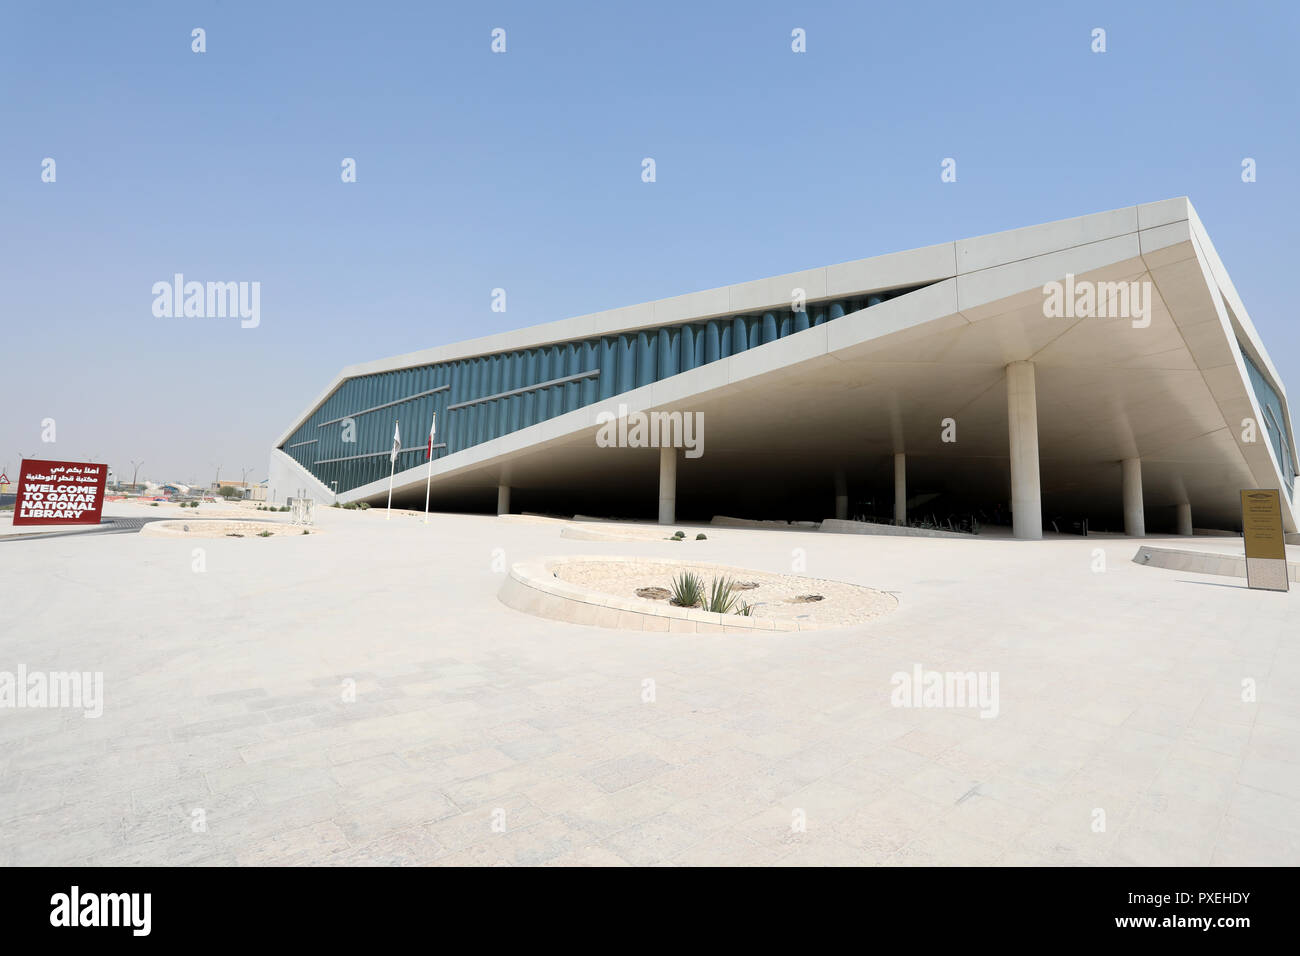 Doha / Qatar – October 9, 2018: The National Library of Qatar, designed by Dutch architect Rem Koolhaas, in the Qatari capital Doha Stock Photo